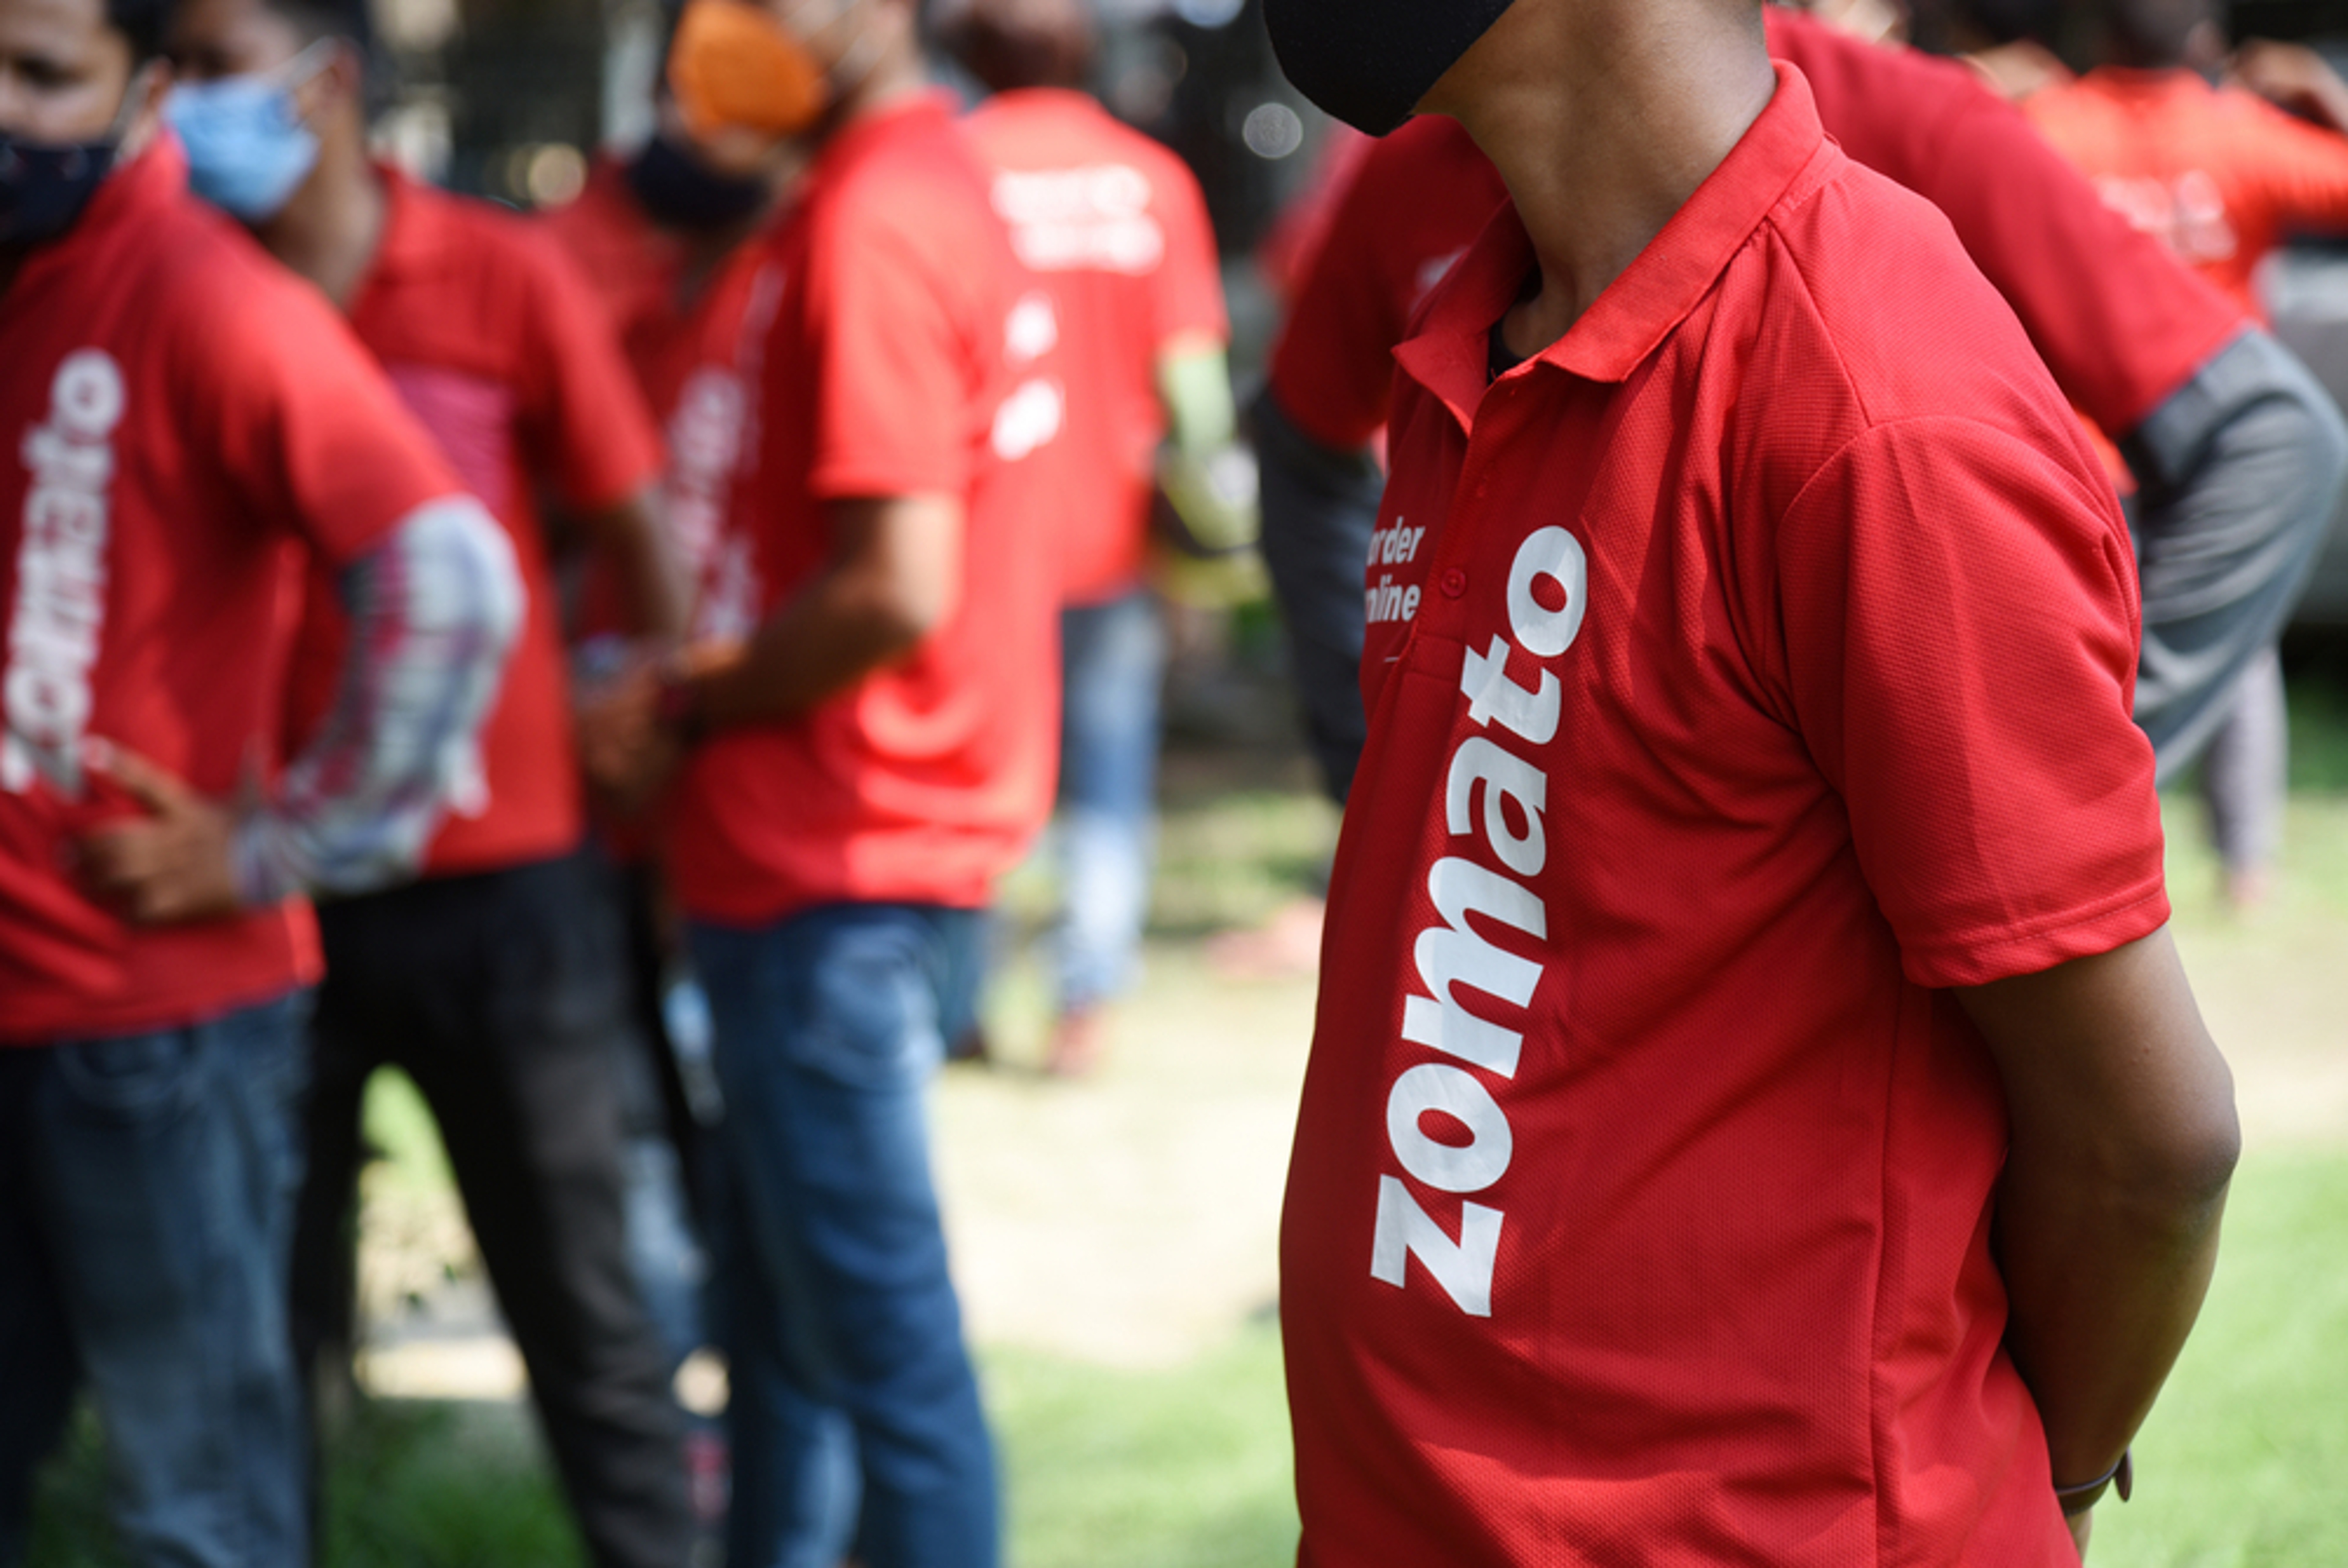 Zomato Shares Tick Up As Analysts Hike Estimates After Key Change